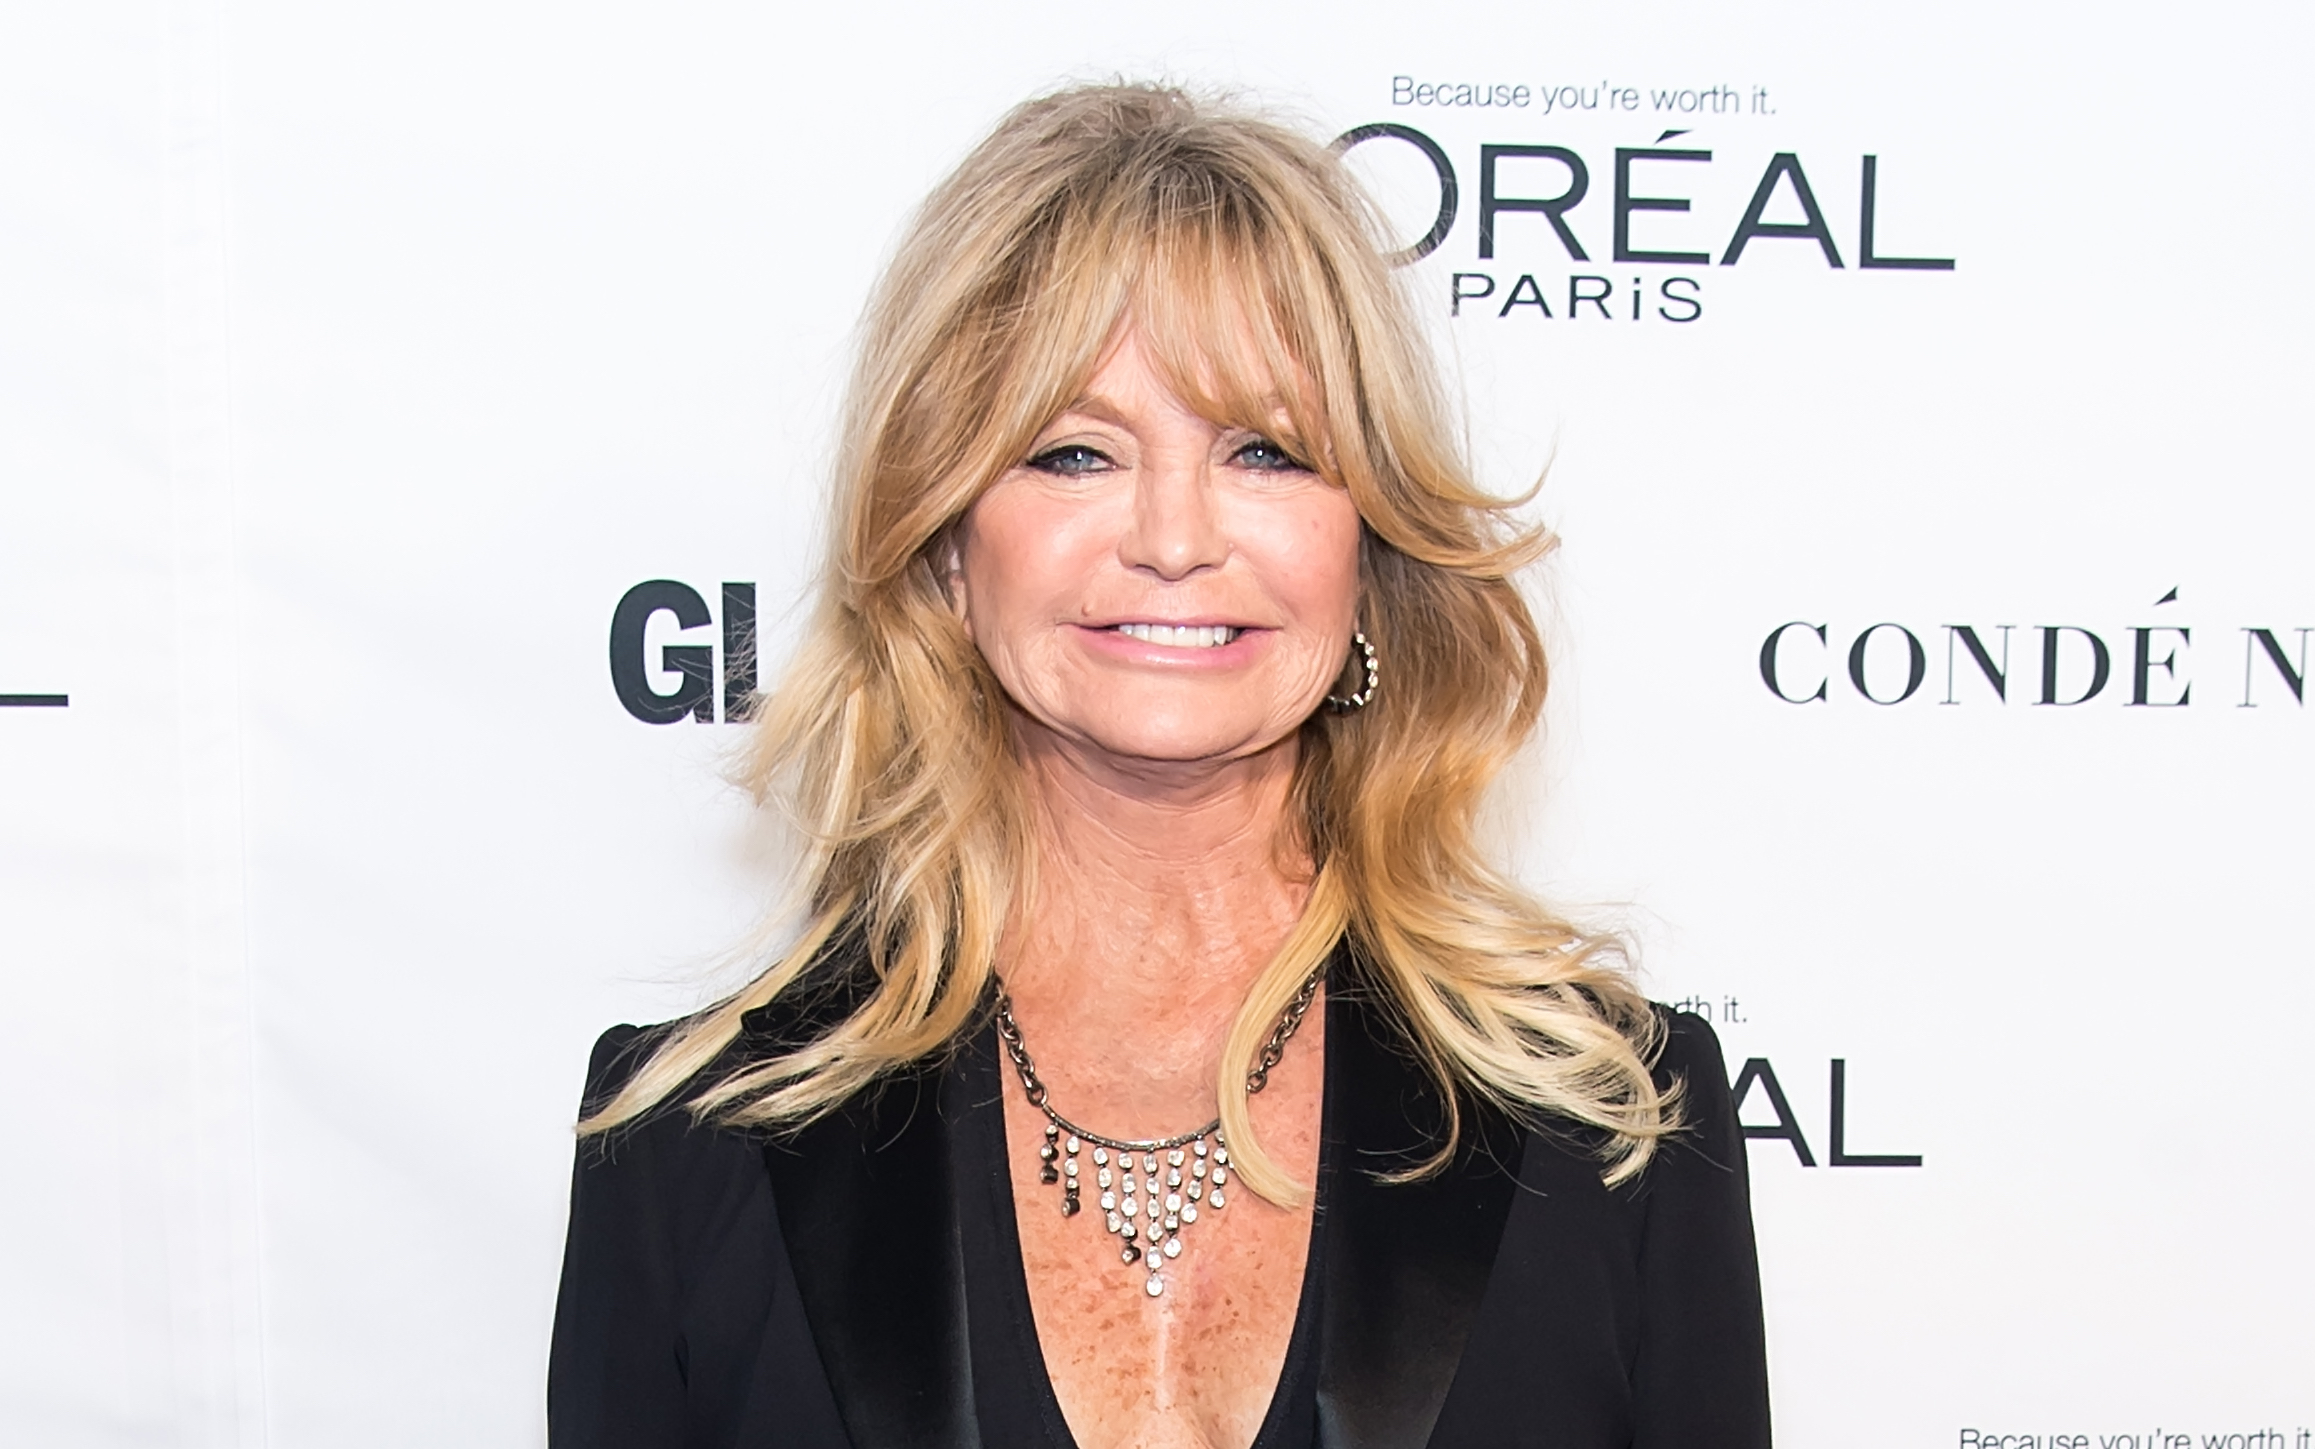 Goldie Hawn reports her L.A. home burglarized twice in four months, calls city ‘terrible.